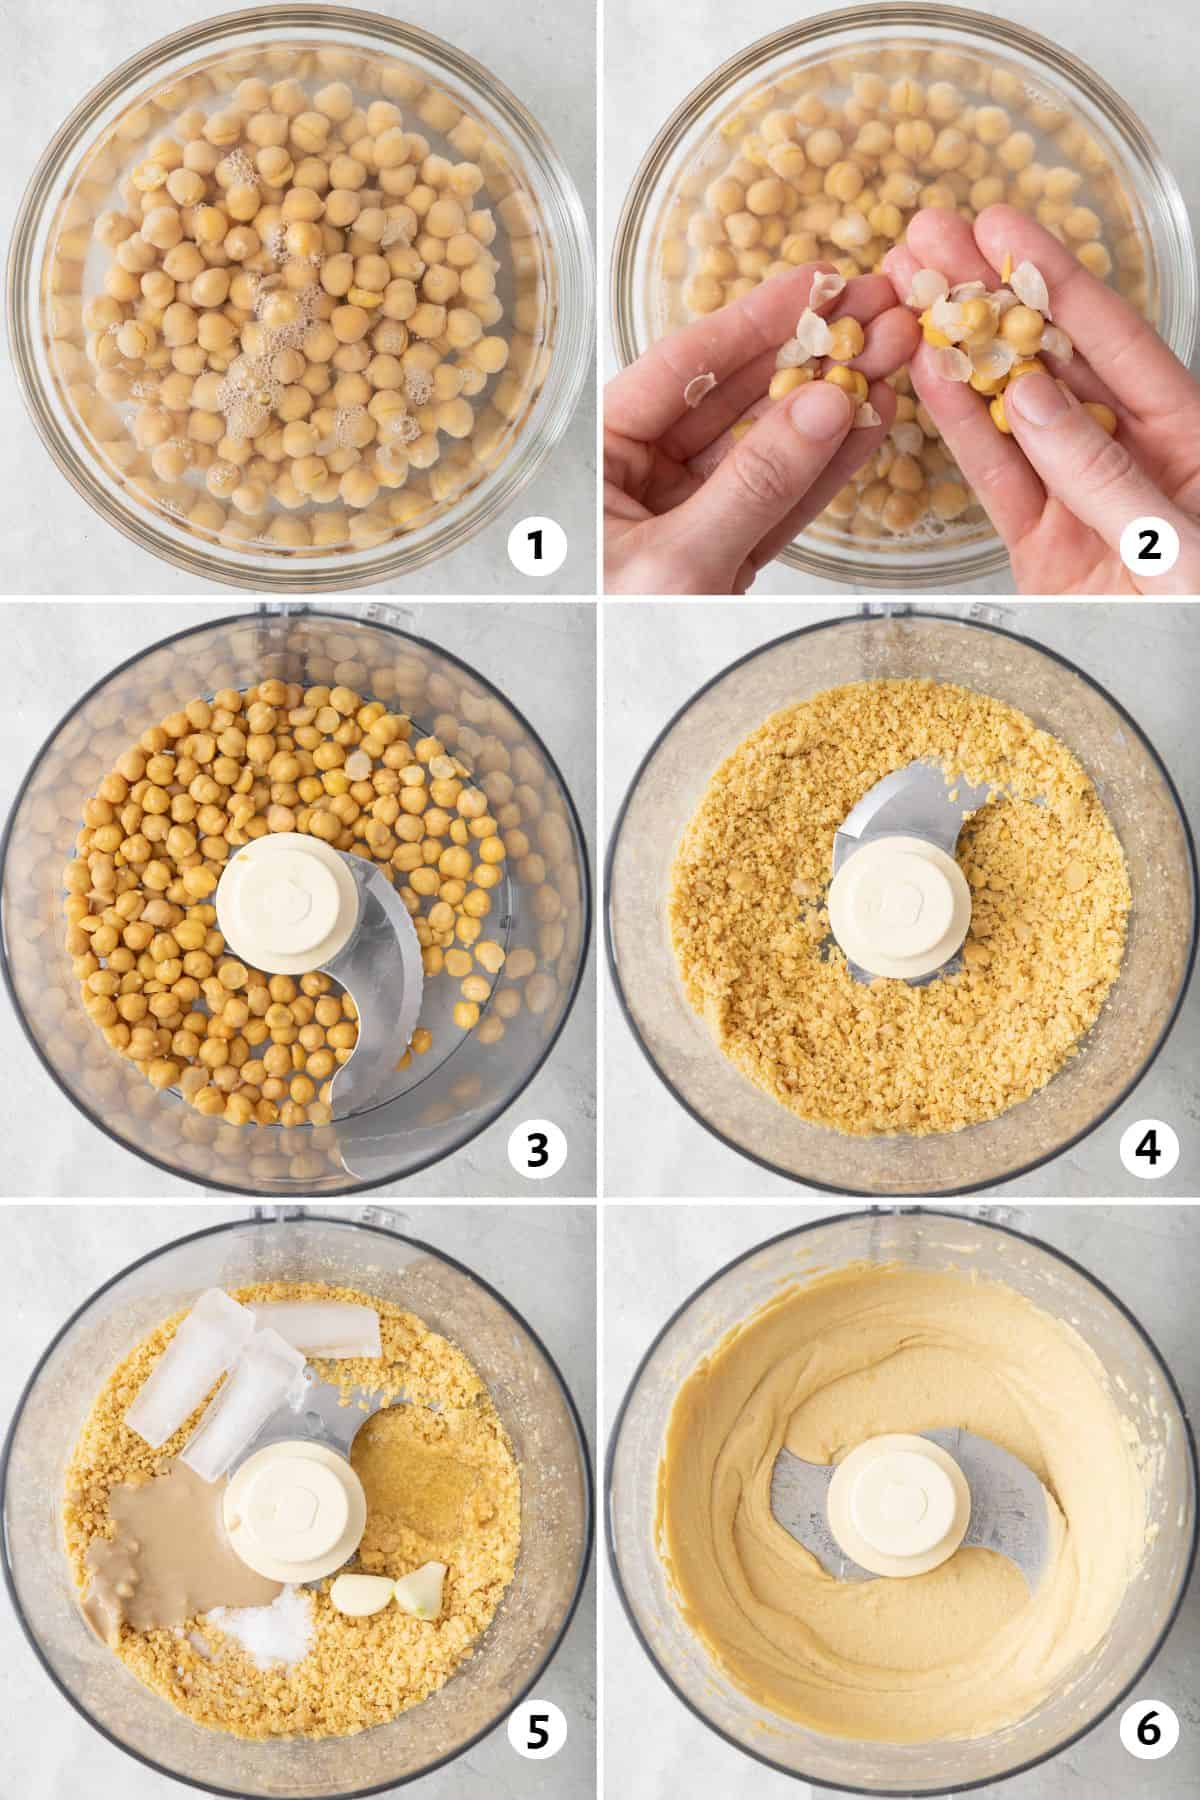 6 image collage making recipe: 1- chickpeas in water, 2- hands removing casing from chickpeas, 3- chickpeas in a food processor before pulsing, 4- after pulsing, 5- remaing ingredients added, 6- after blended smooth.